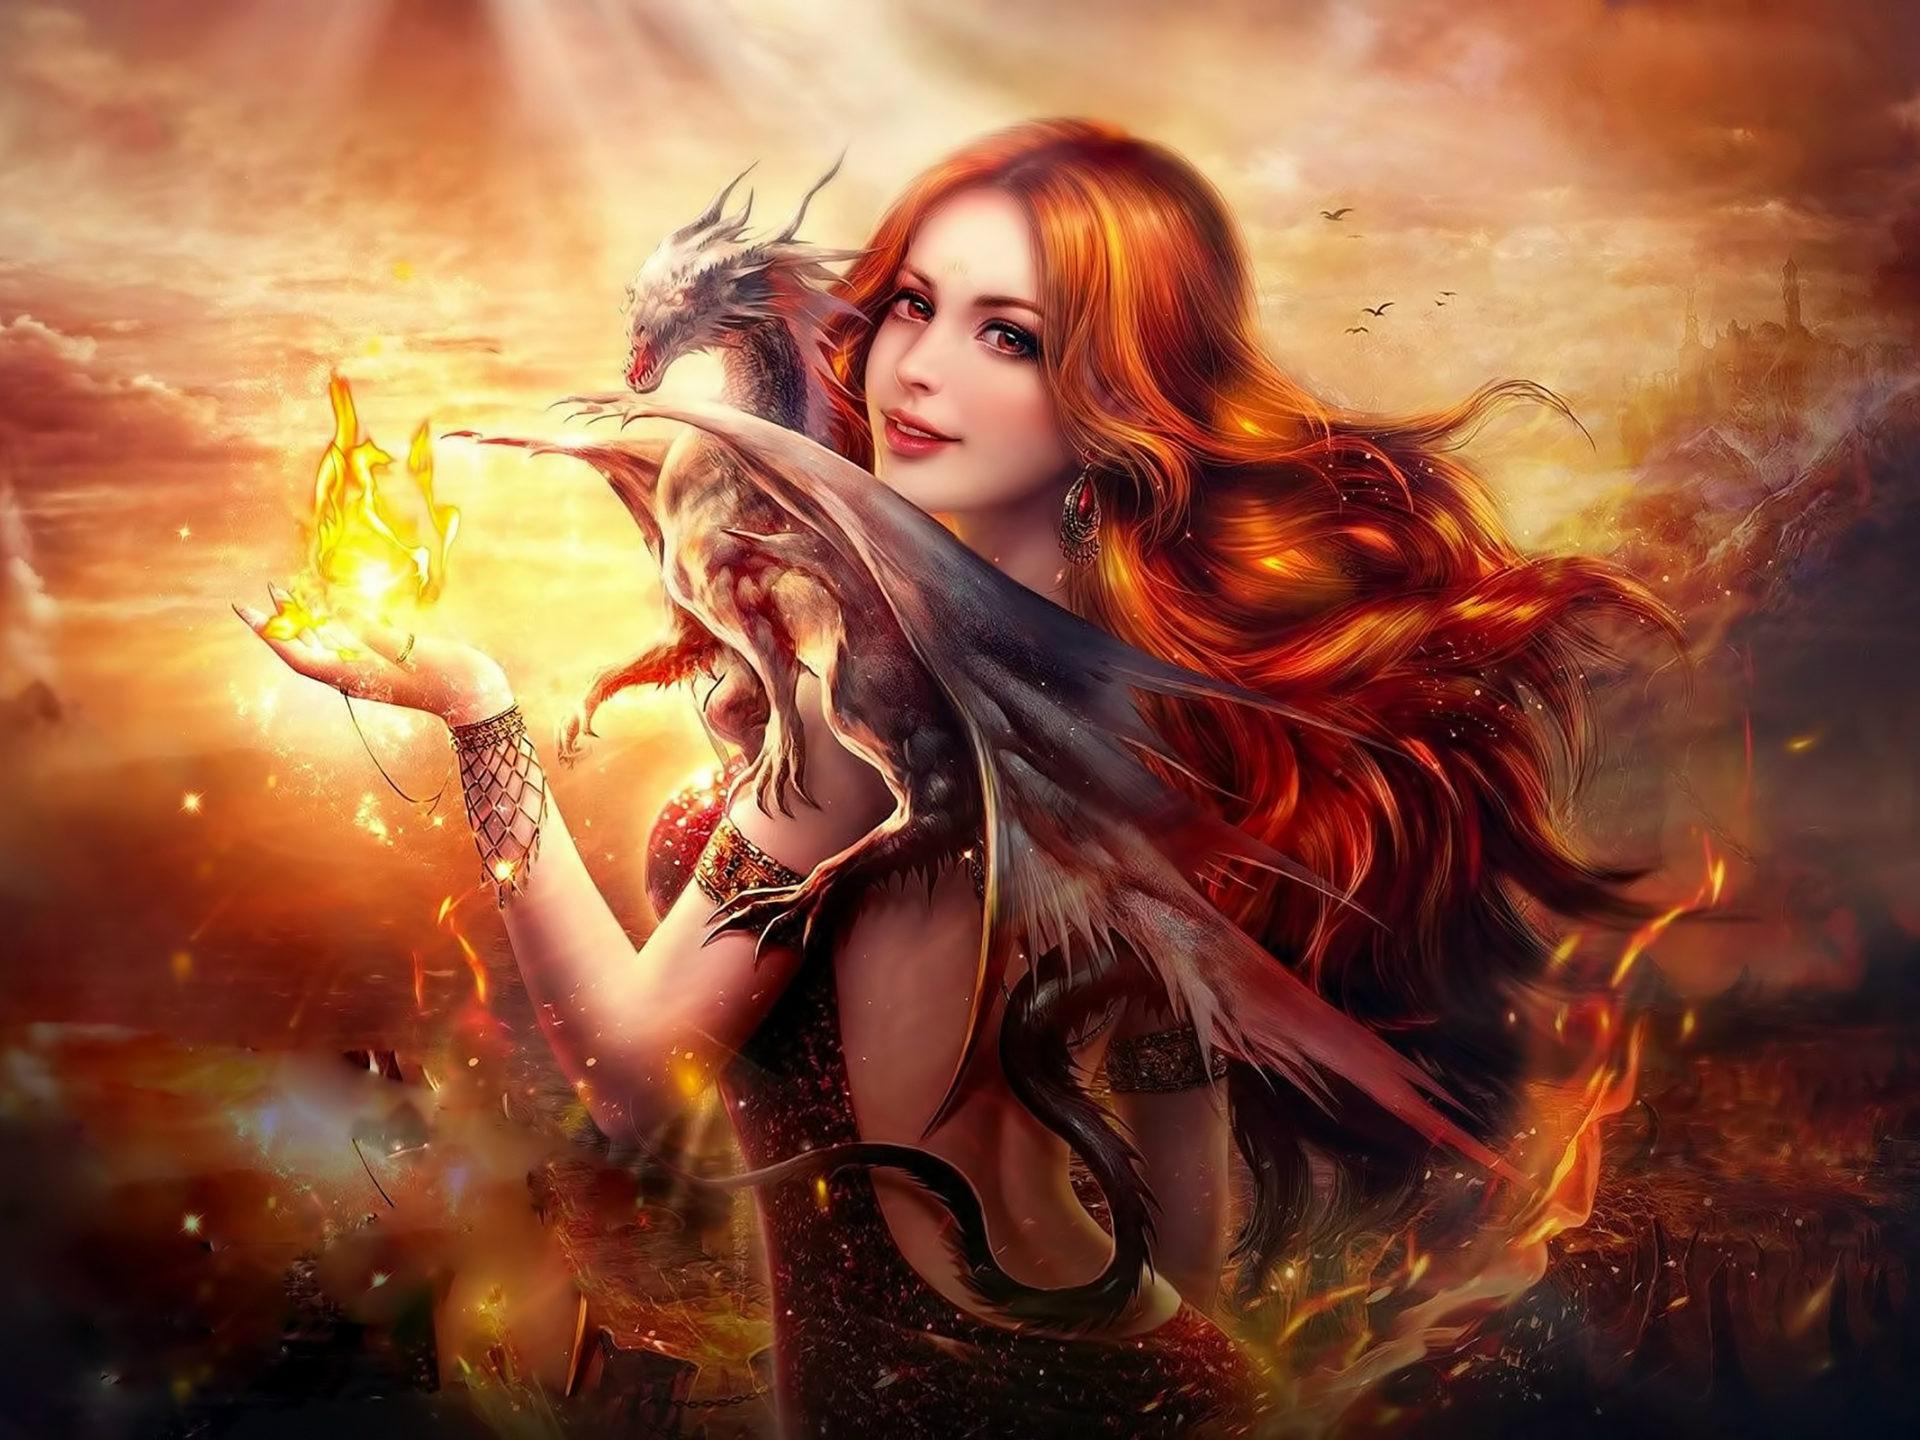 Girl with red hair and dragon fire monster of mythology